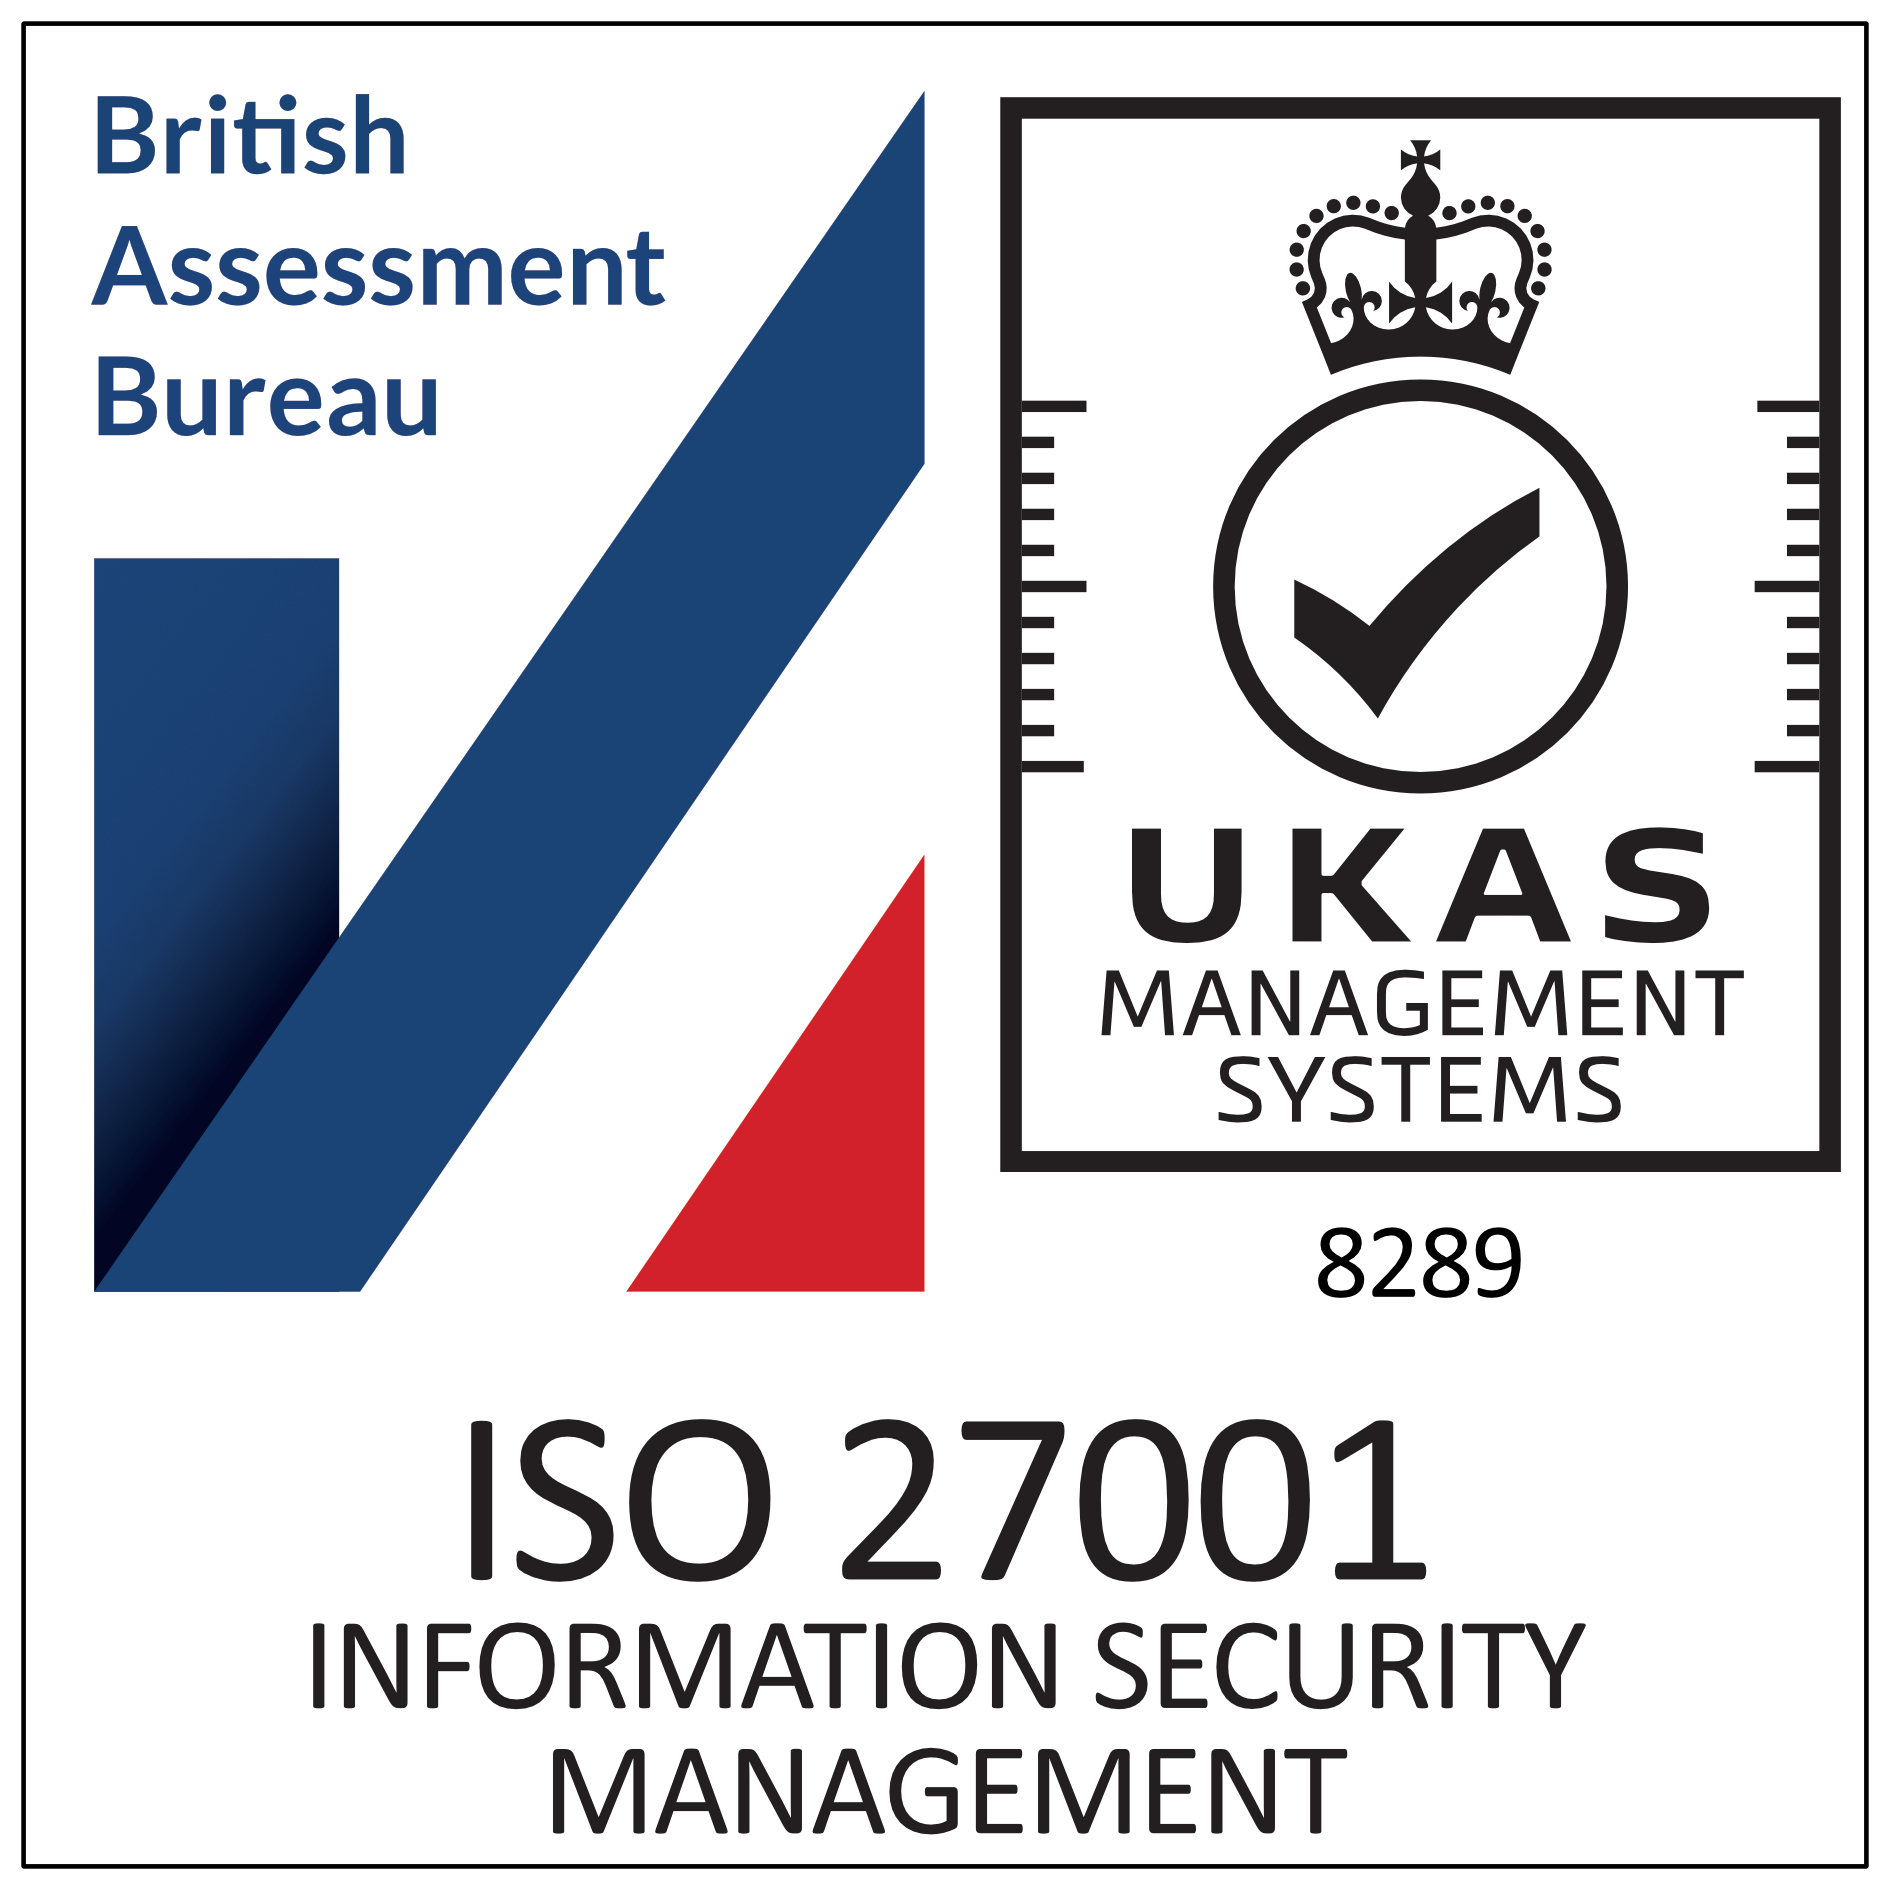 SARD JV are ISO 27001 certified by the British Assessment Bureau. Certificate no. 213141.